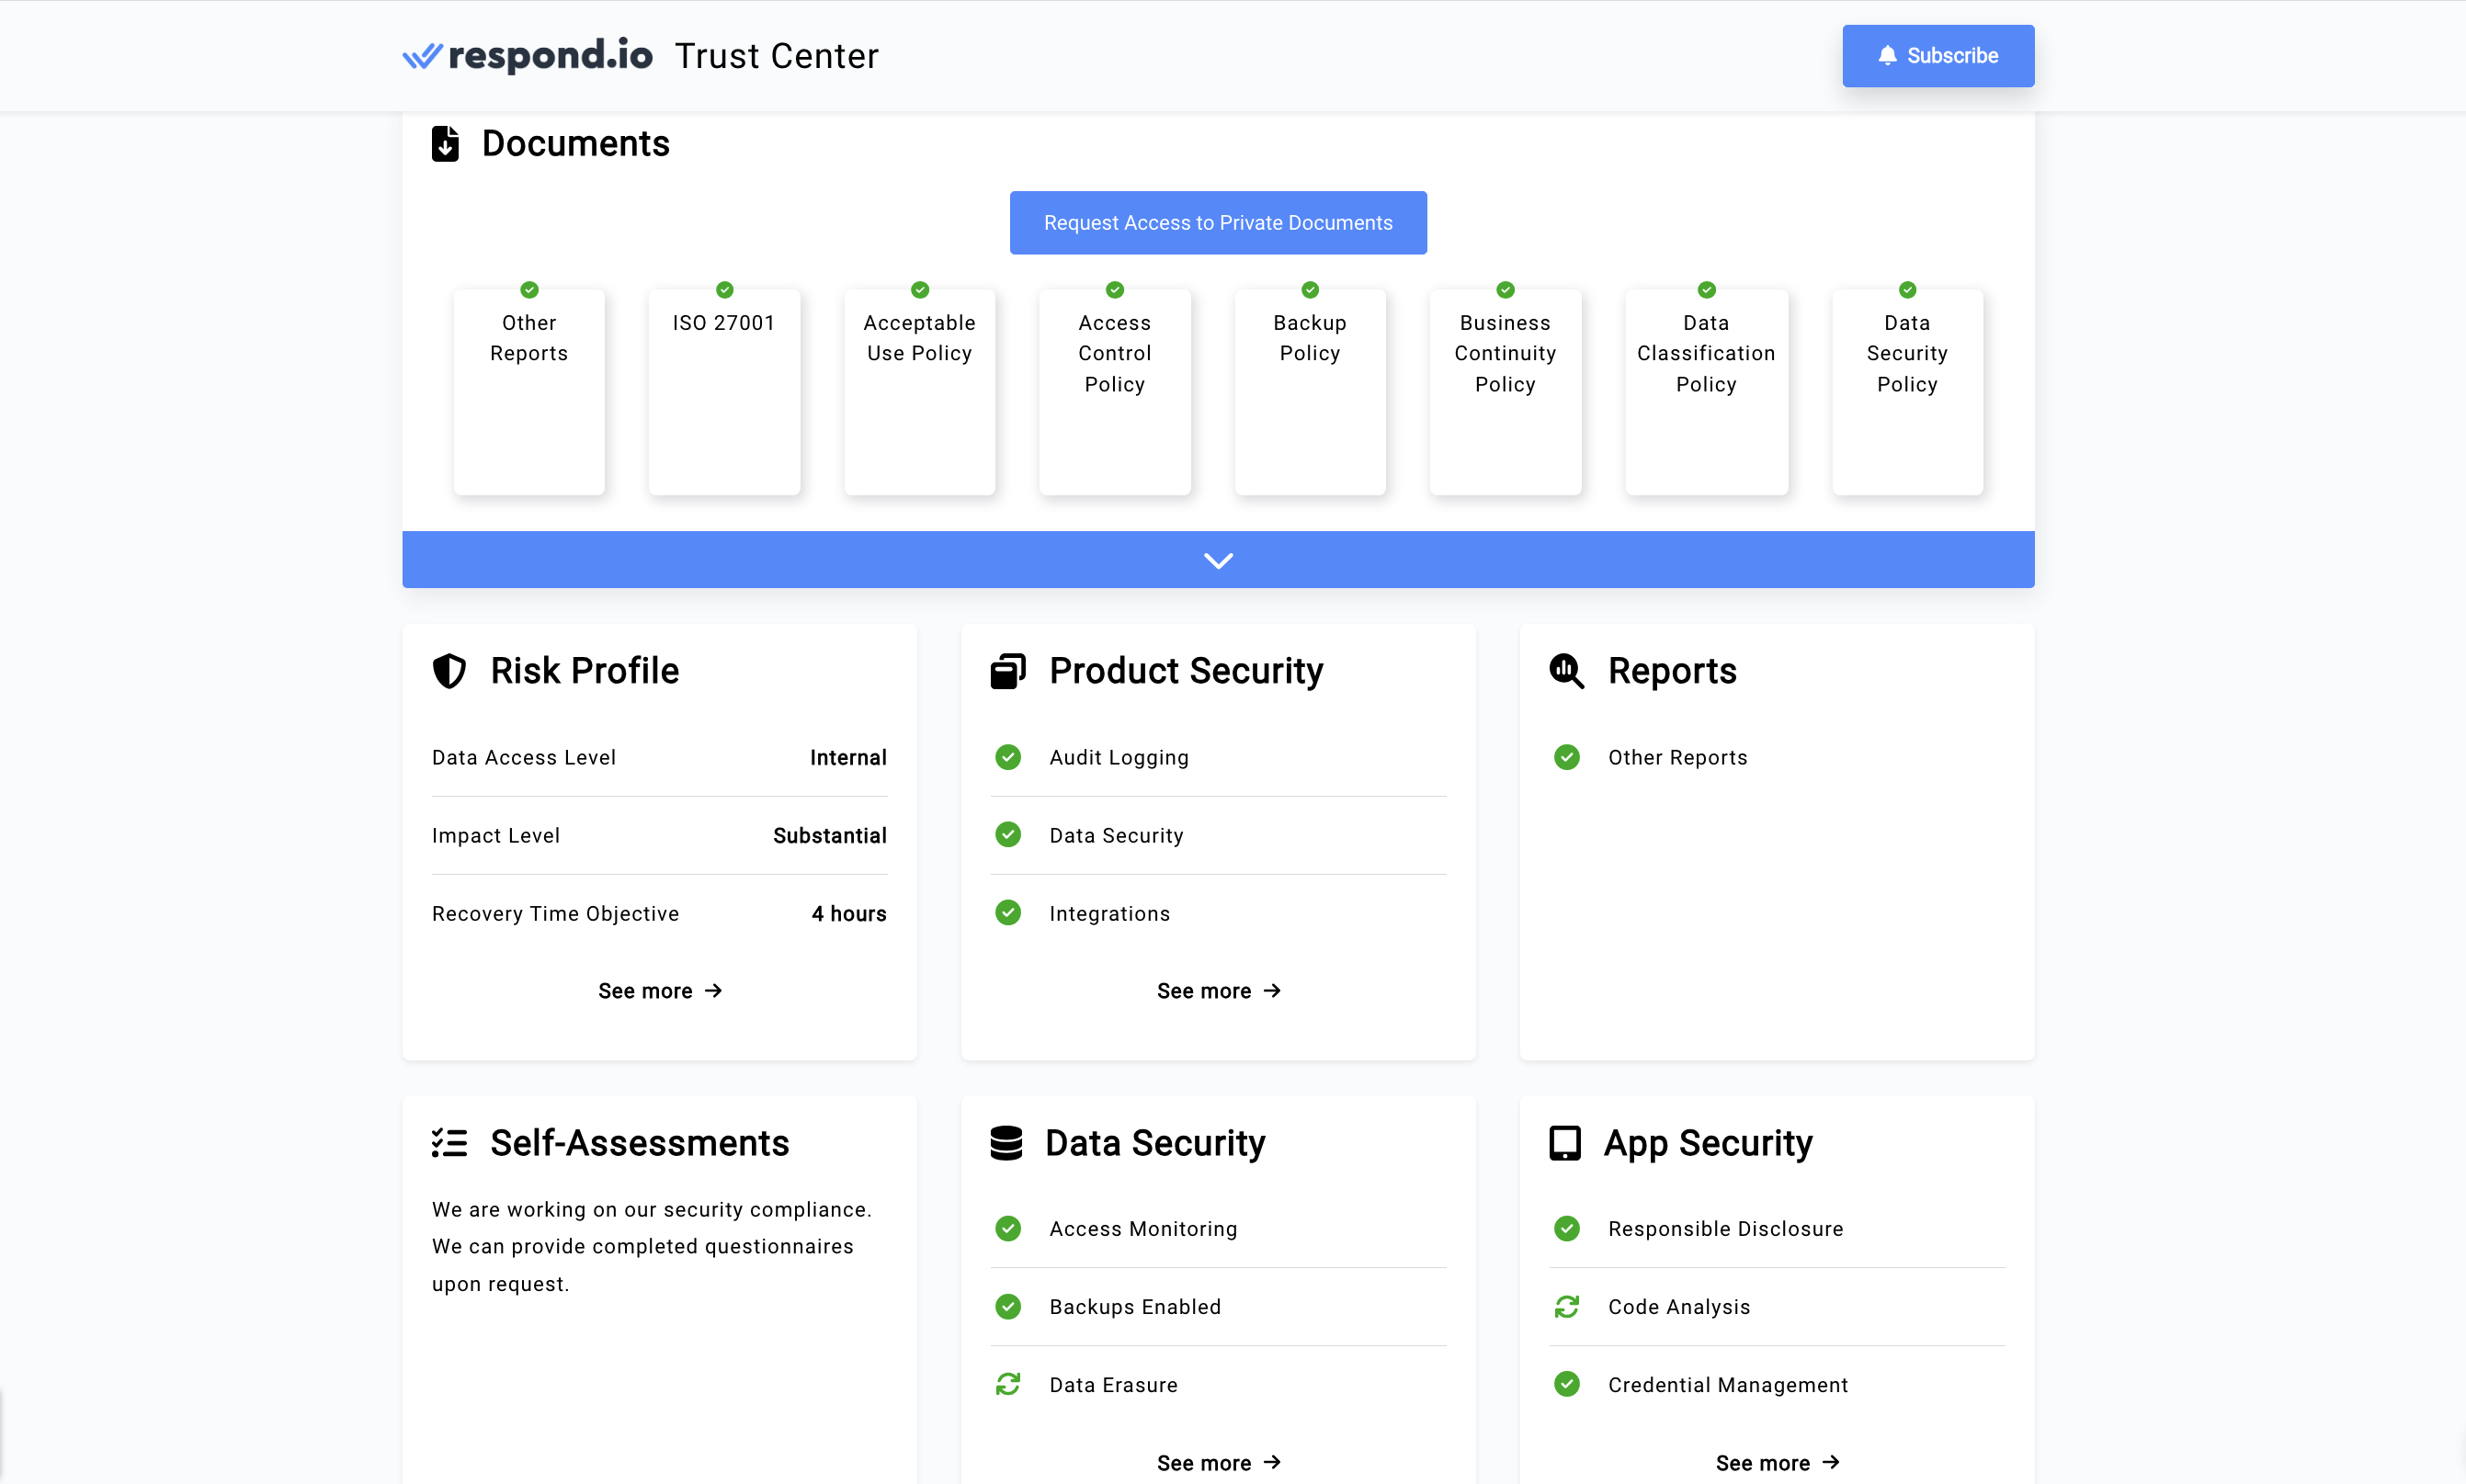 The respond.io Trust Center is a repository of the company’s privacy practices and security measures